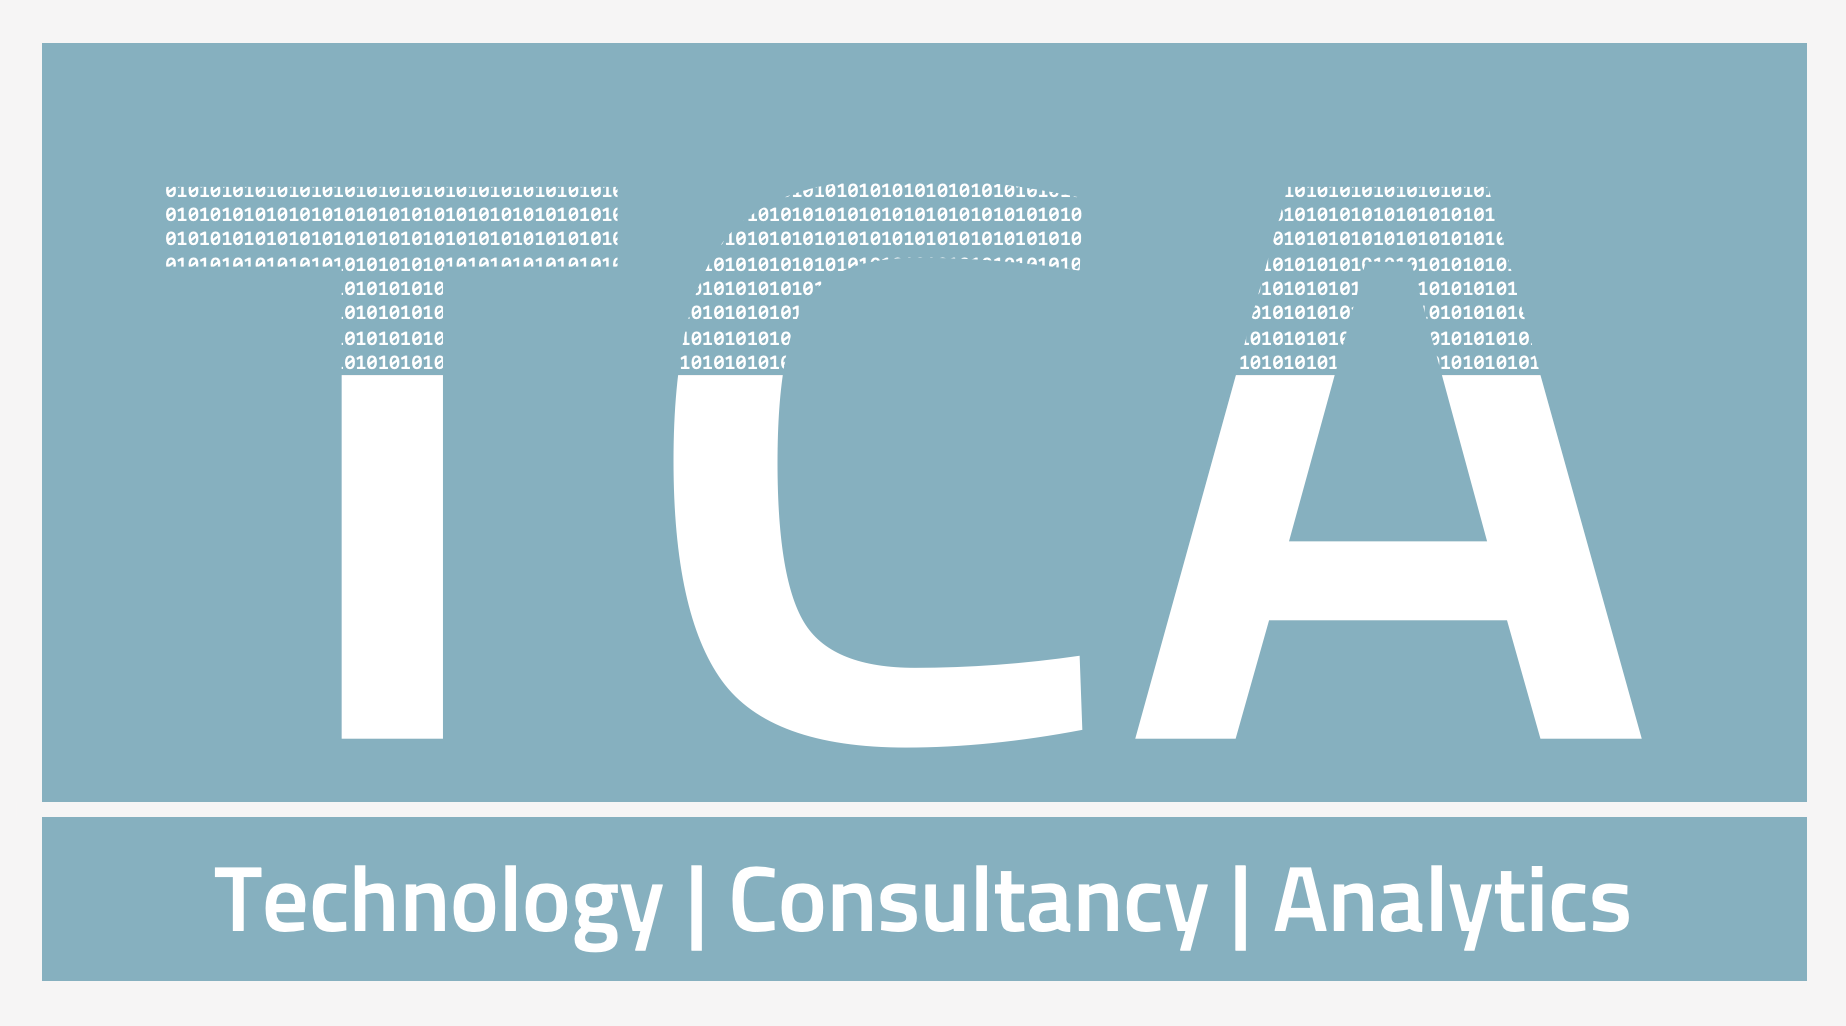 TCA data solutions - The value is not the data itself, but lies in their use